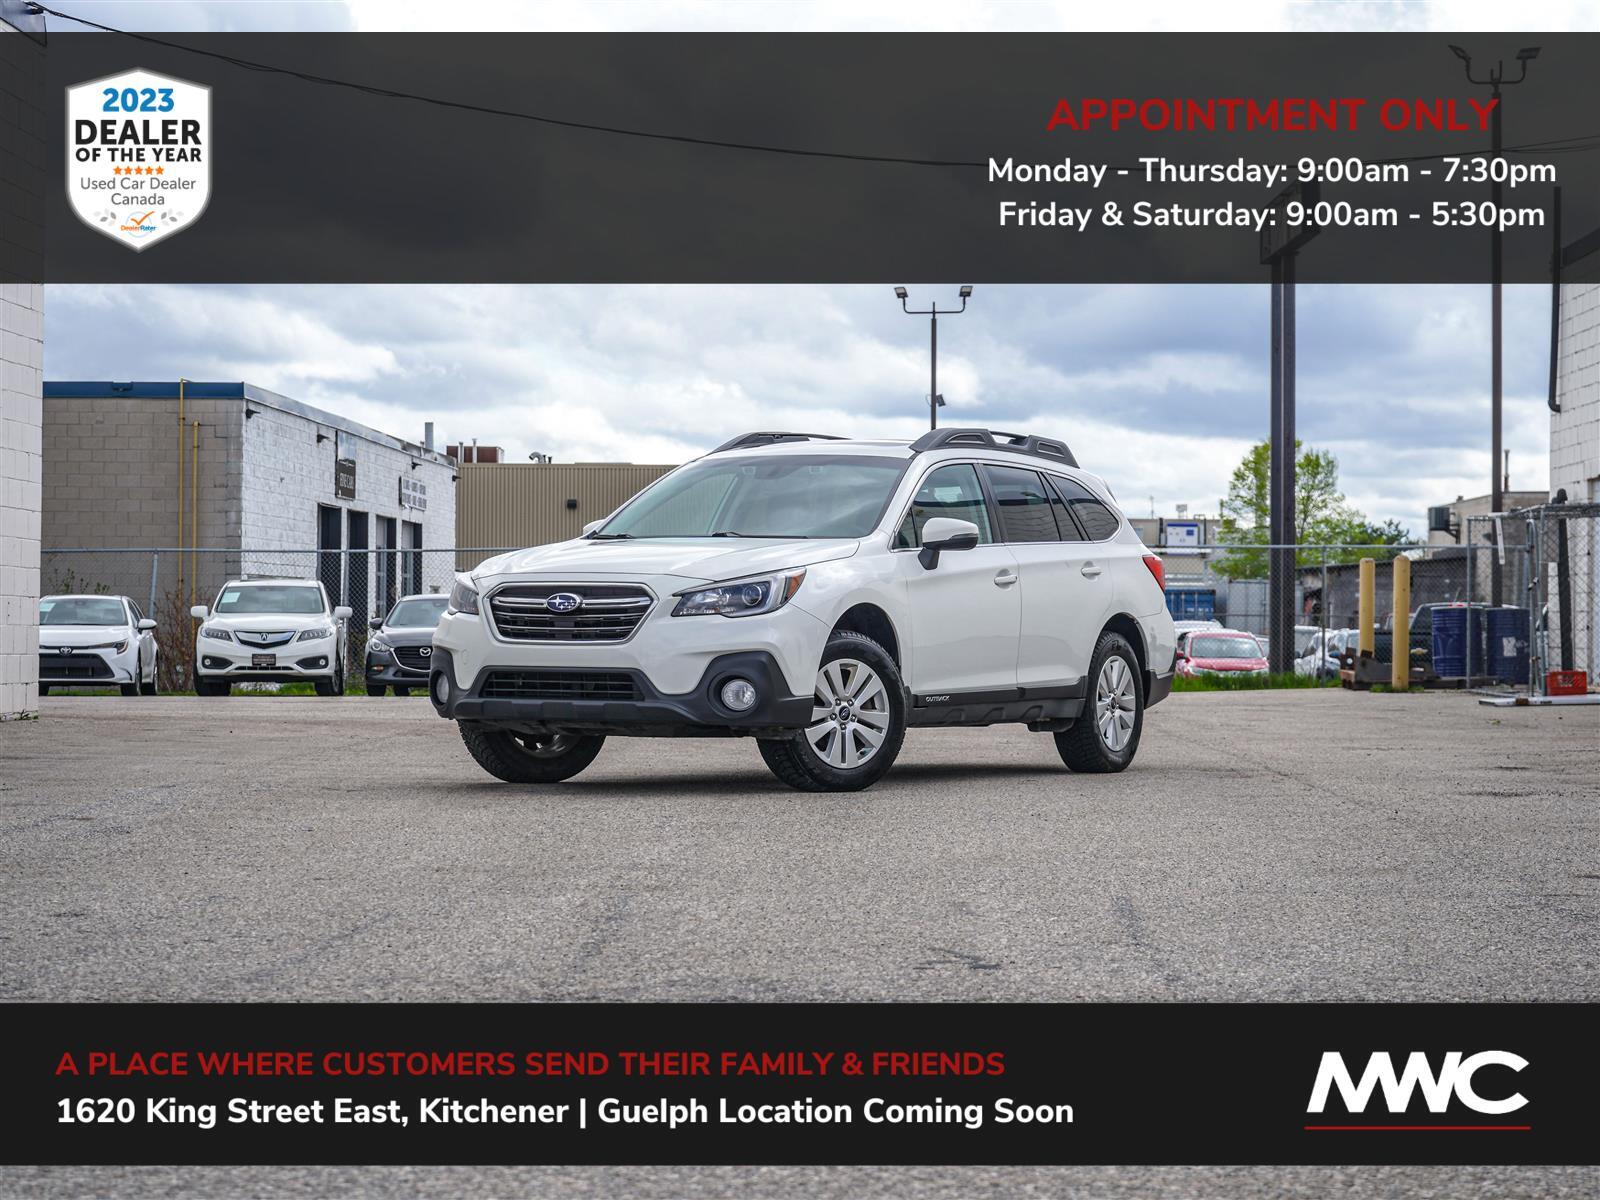 2019 Subaru Outback TOURING | AWD | IN GUELPH, BY APPT. ONLY